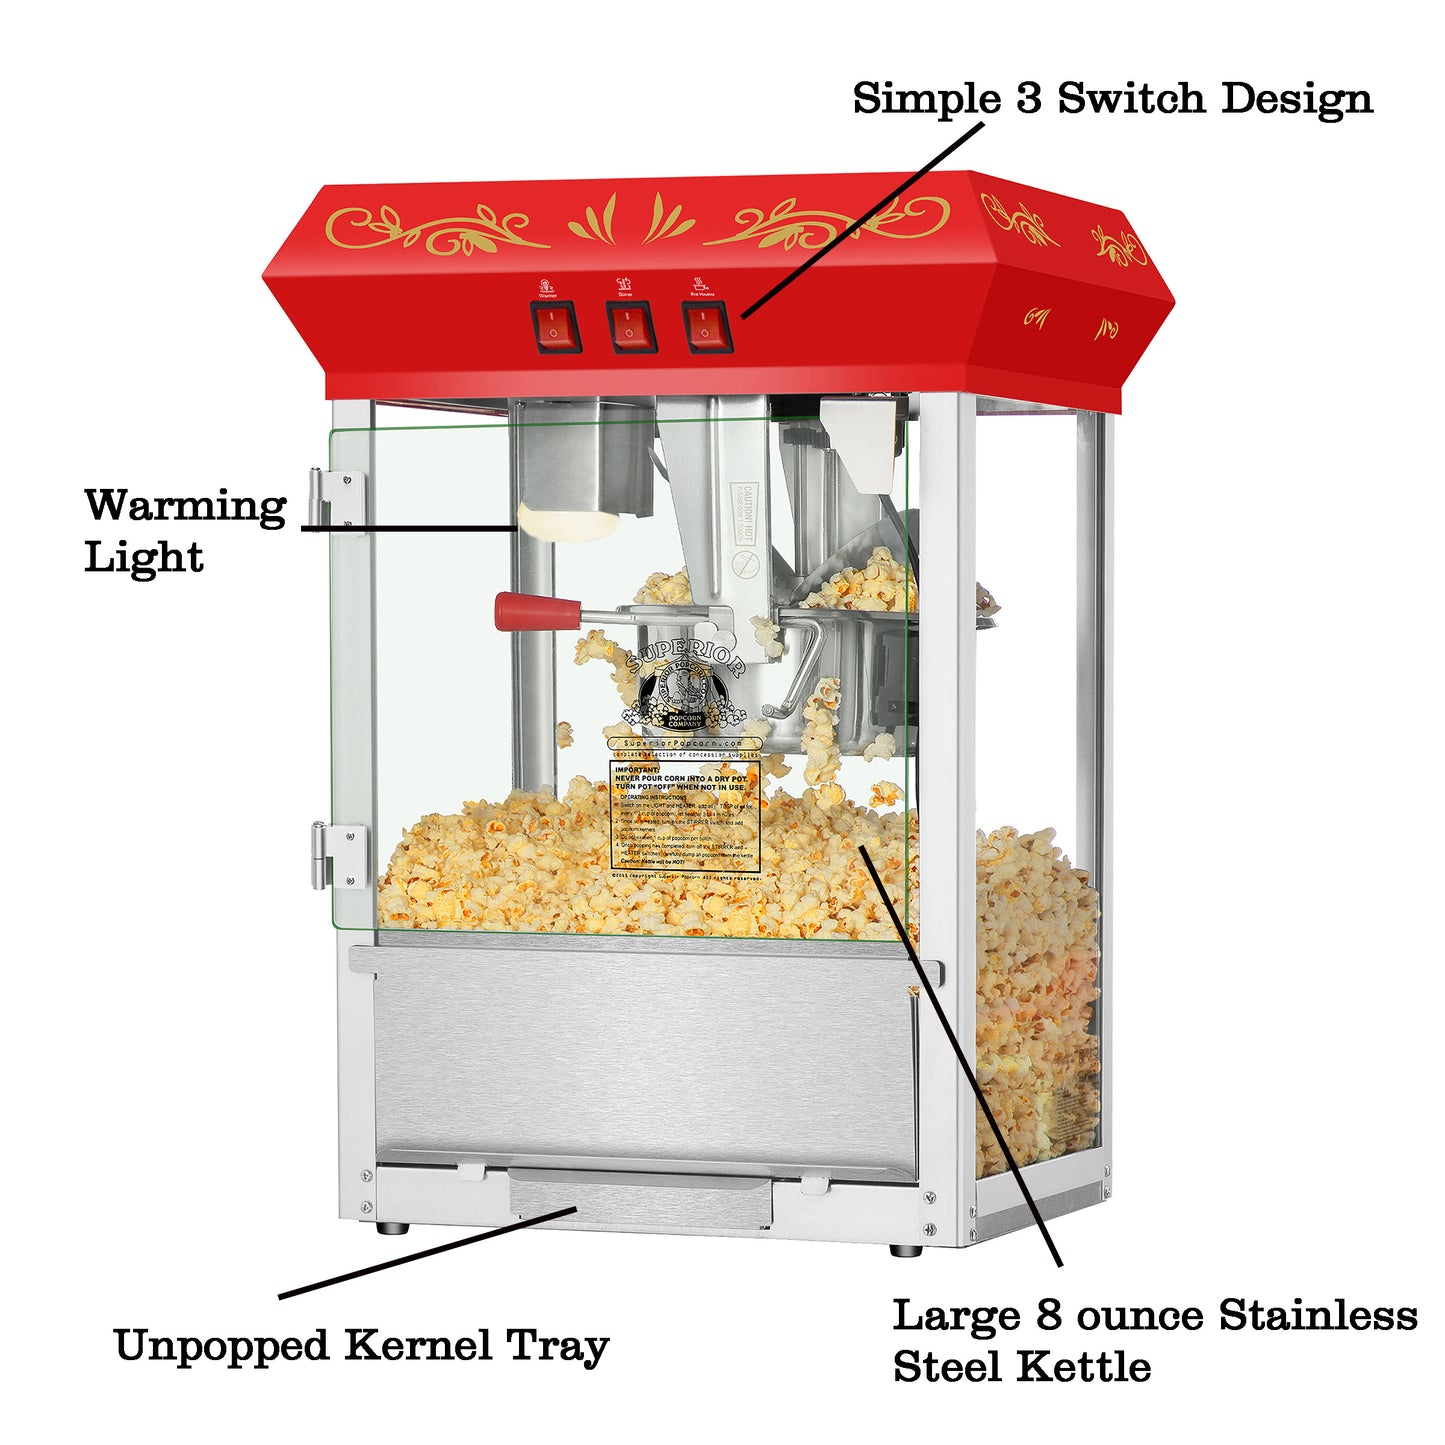 Carnival Countertop Popcorn Machine with 8oz Kettle and 5 All-In-One Popcorn Packs - Red